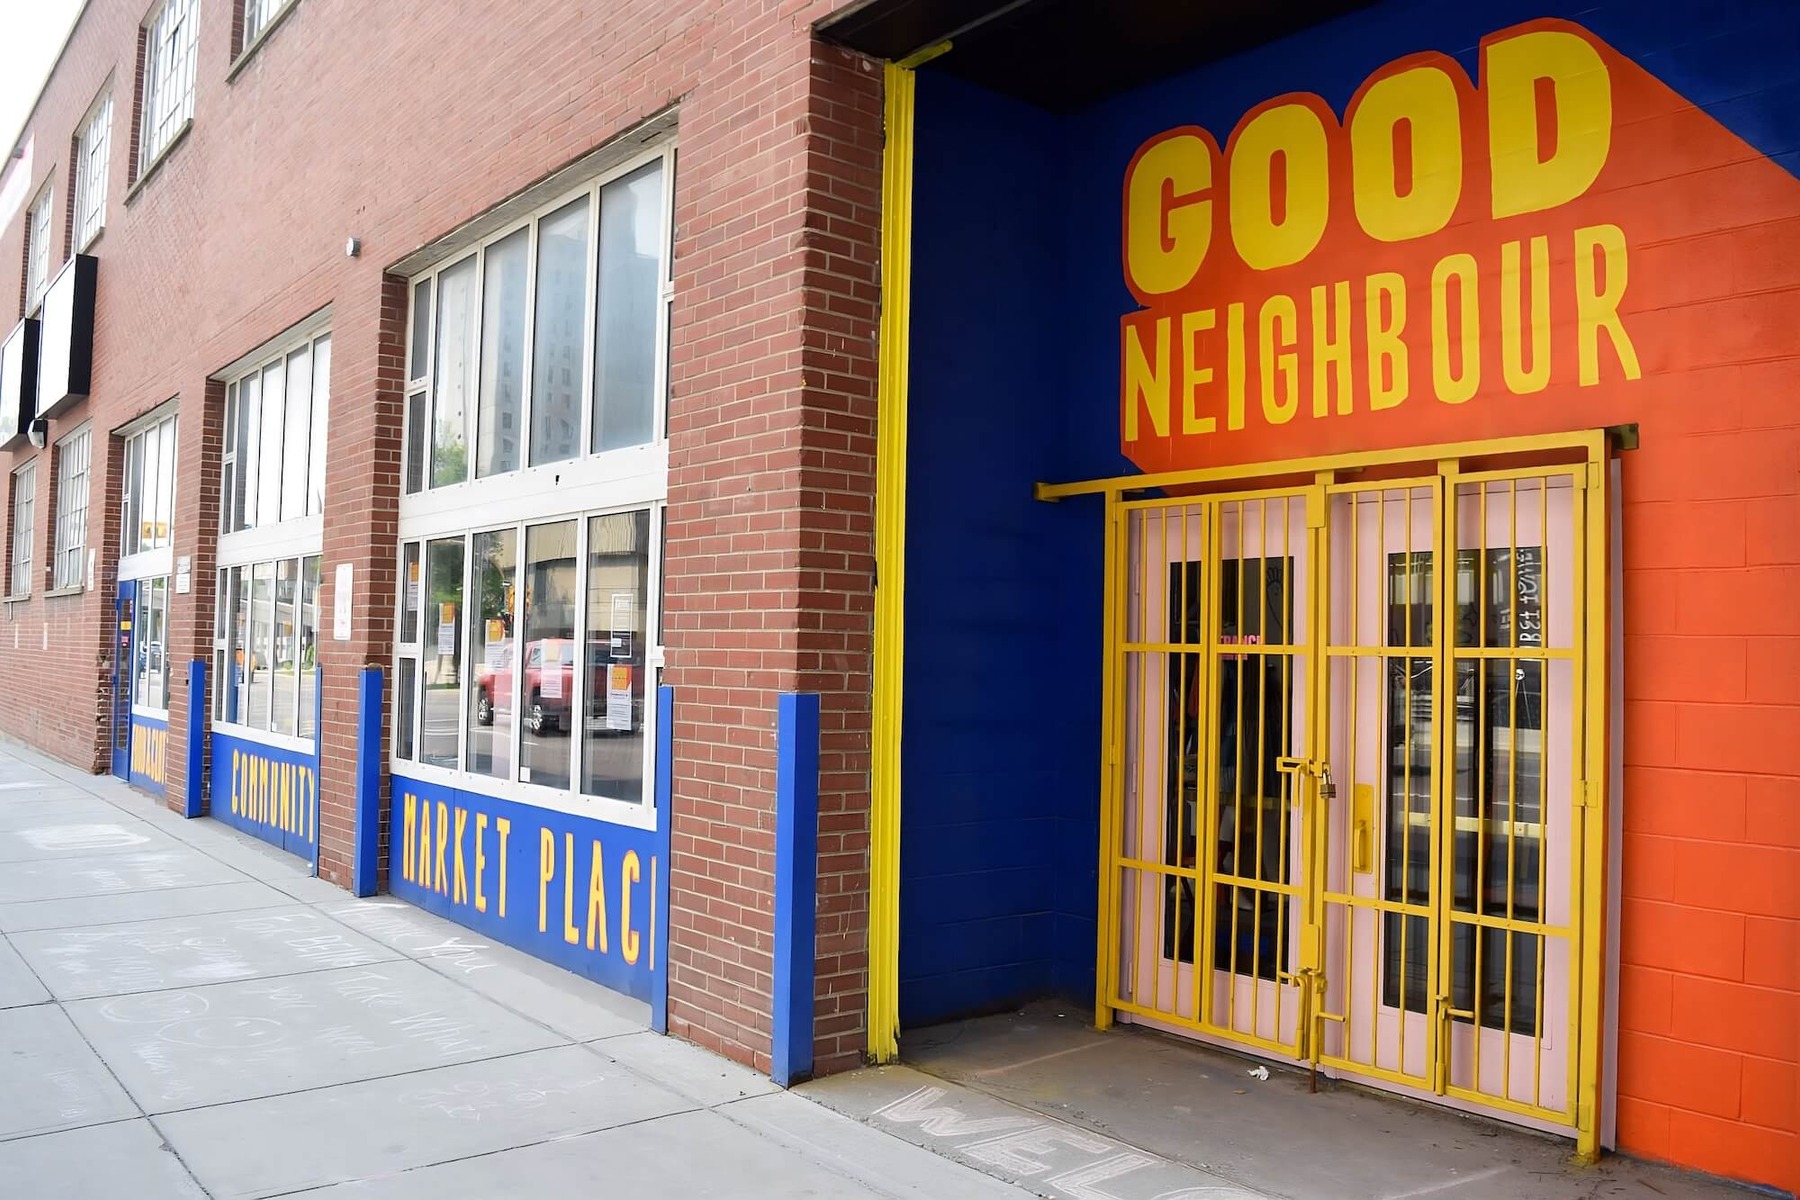 A community marketplace with an orange sign reading 'Good Neighbour'